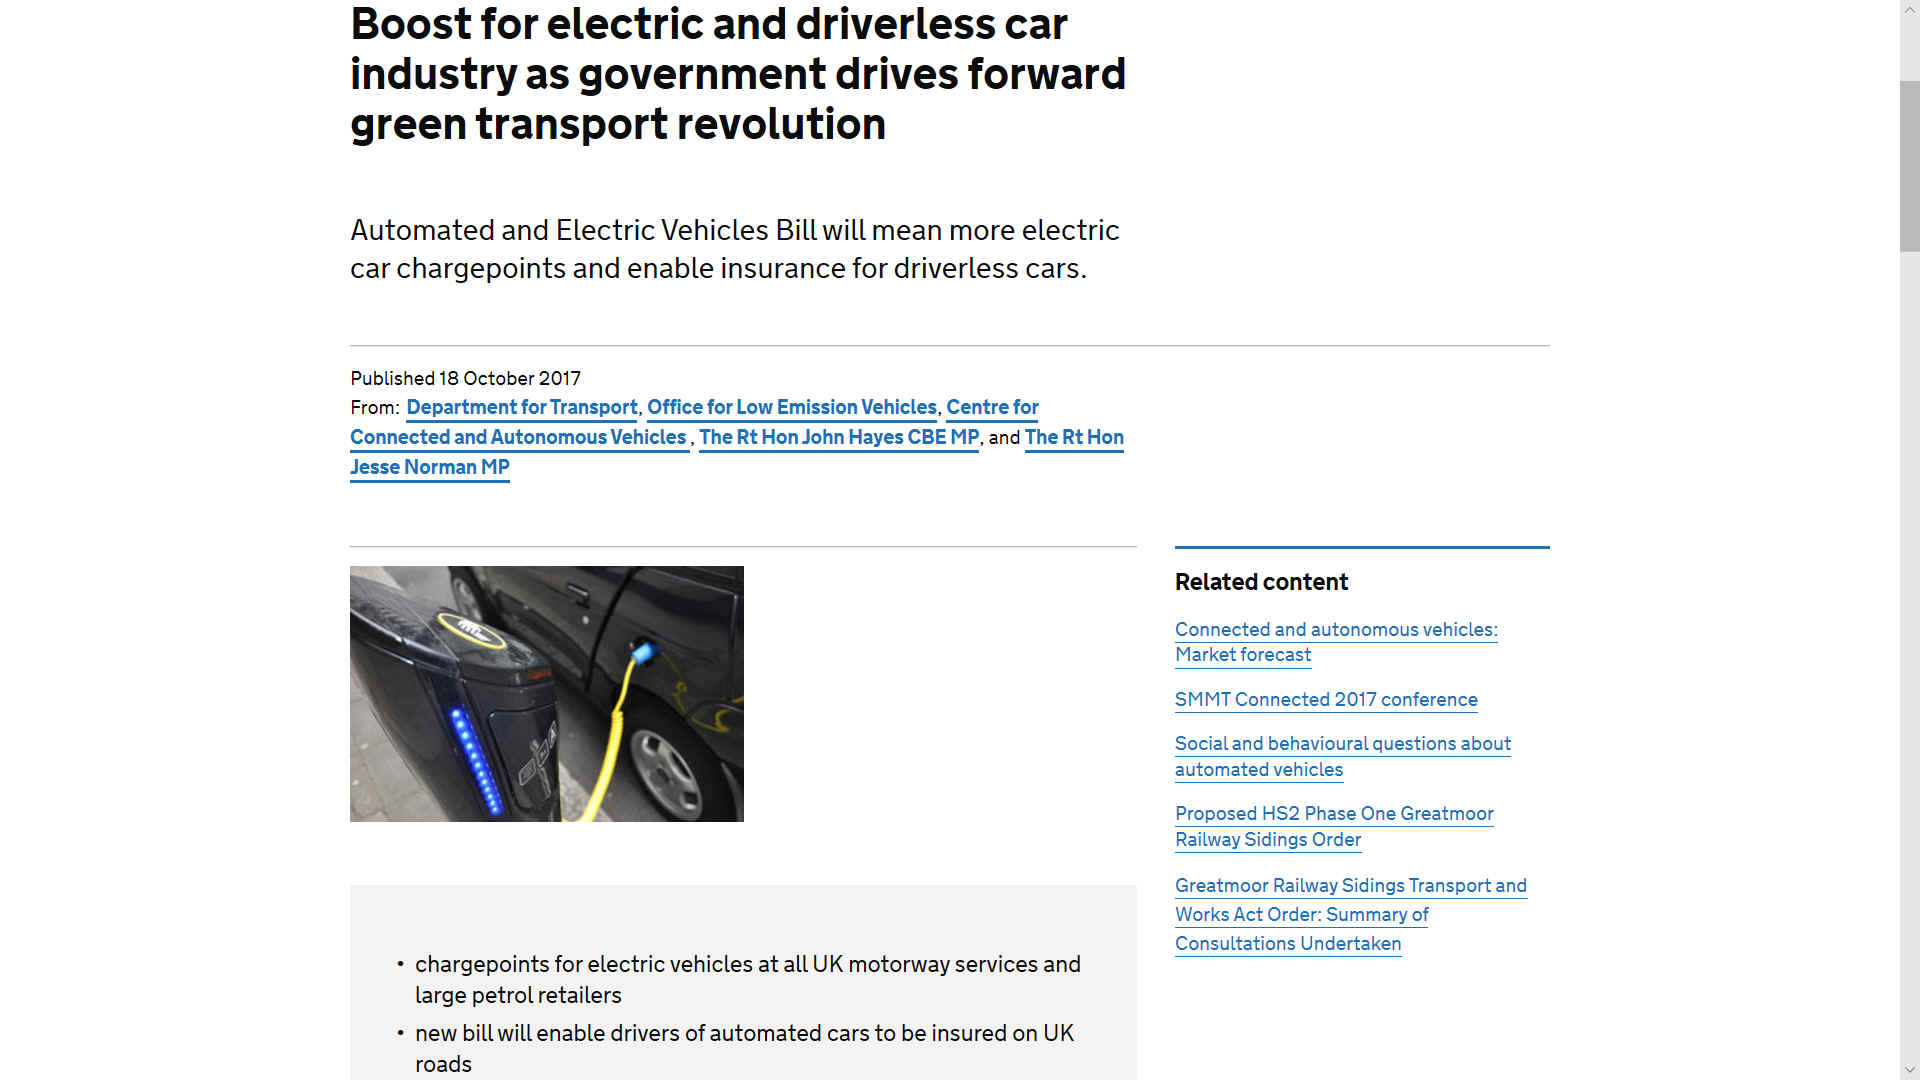 DOT boost for driverless cars and electric vehicles charging points